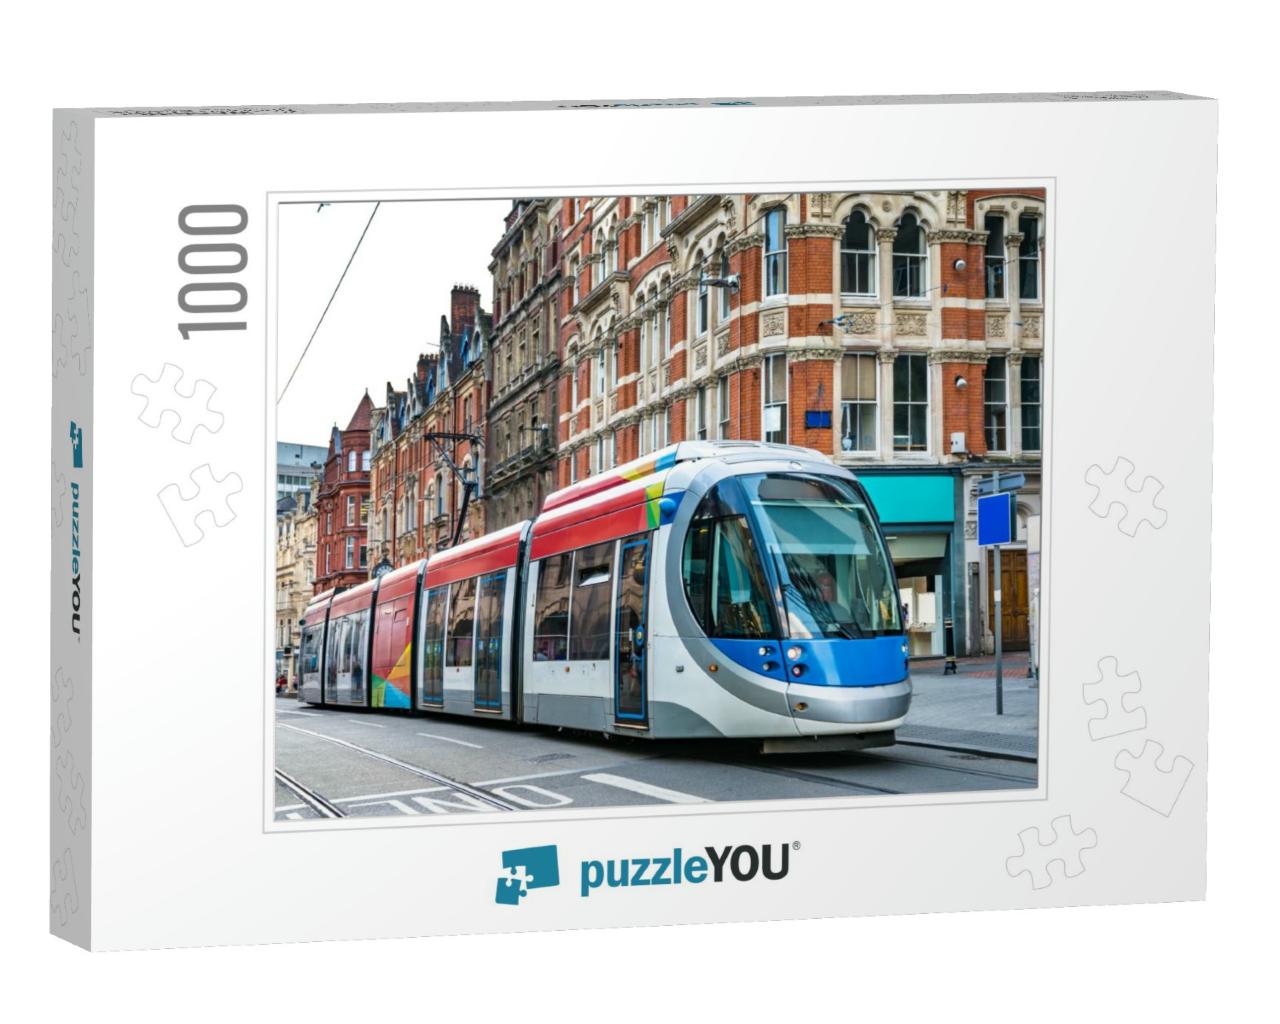 City Tram on a Street of Birmingham in England... Jigsaw Puzzle with 1000 pieces